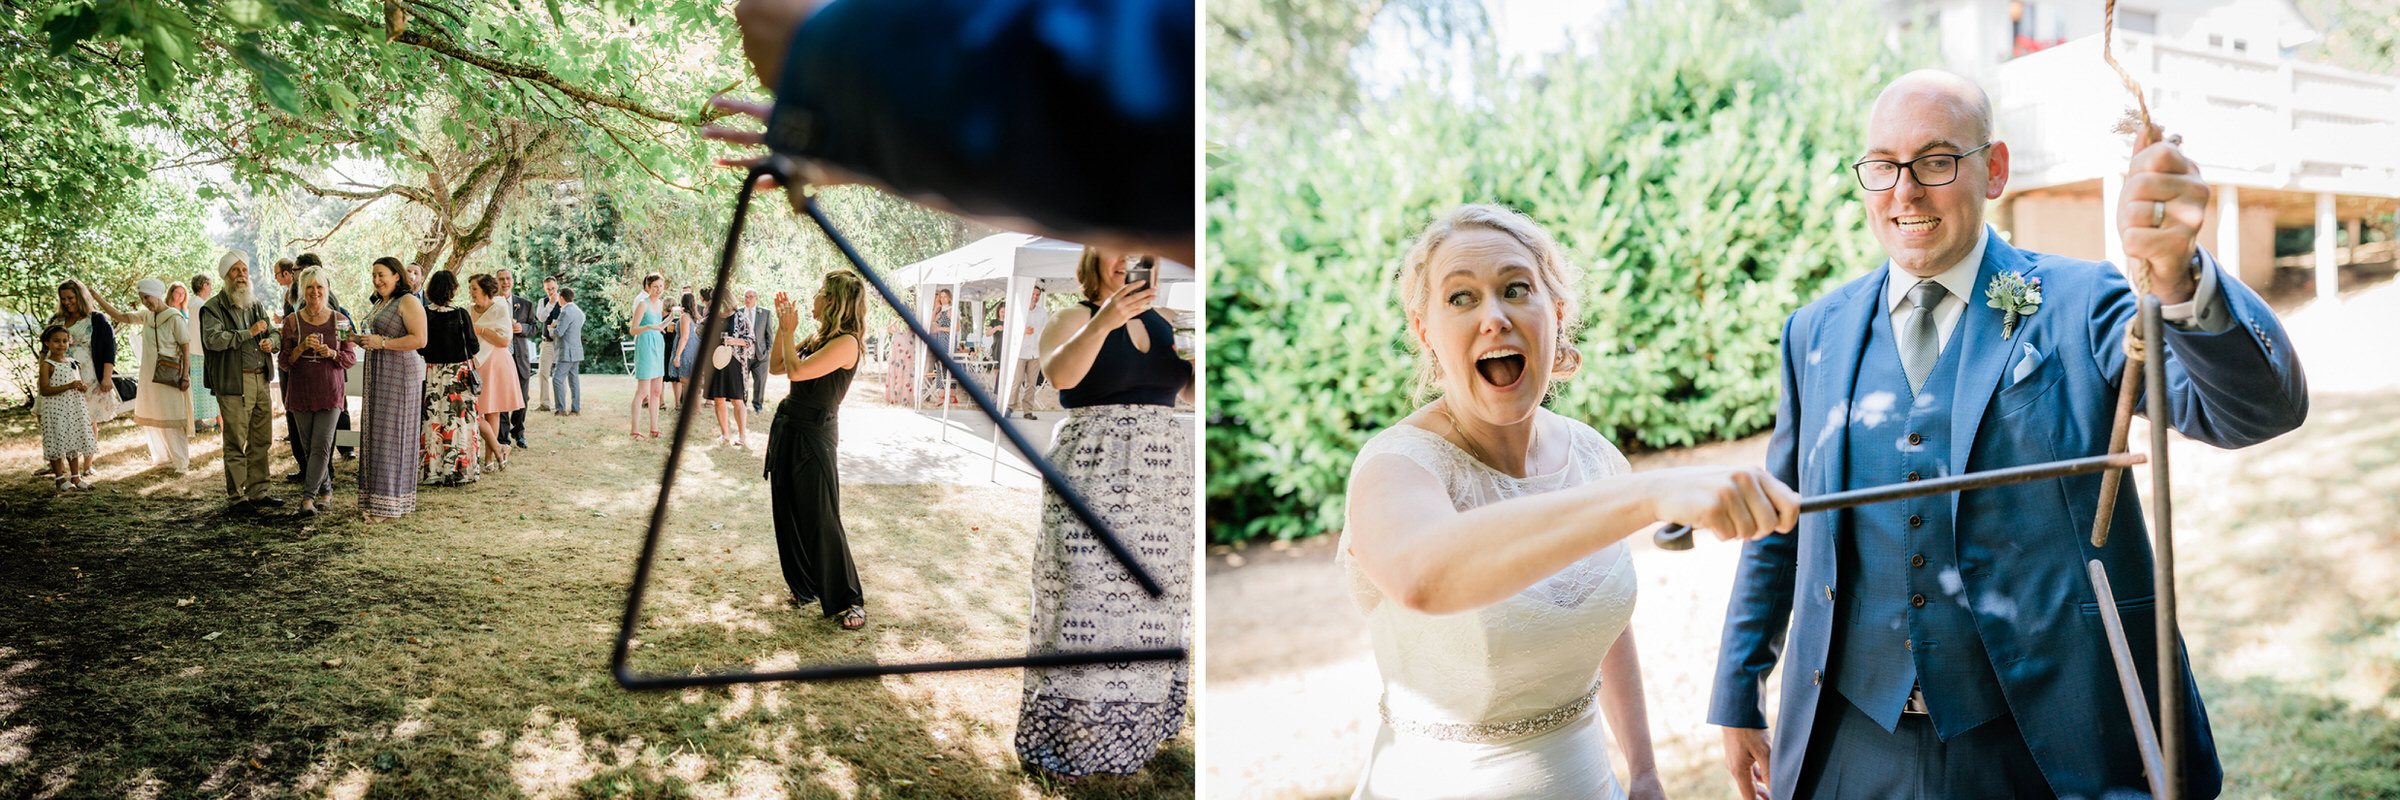 Wayfarer Whidbey Island Wedding: Bride and groom ringing the dinner bell at their wedding